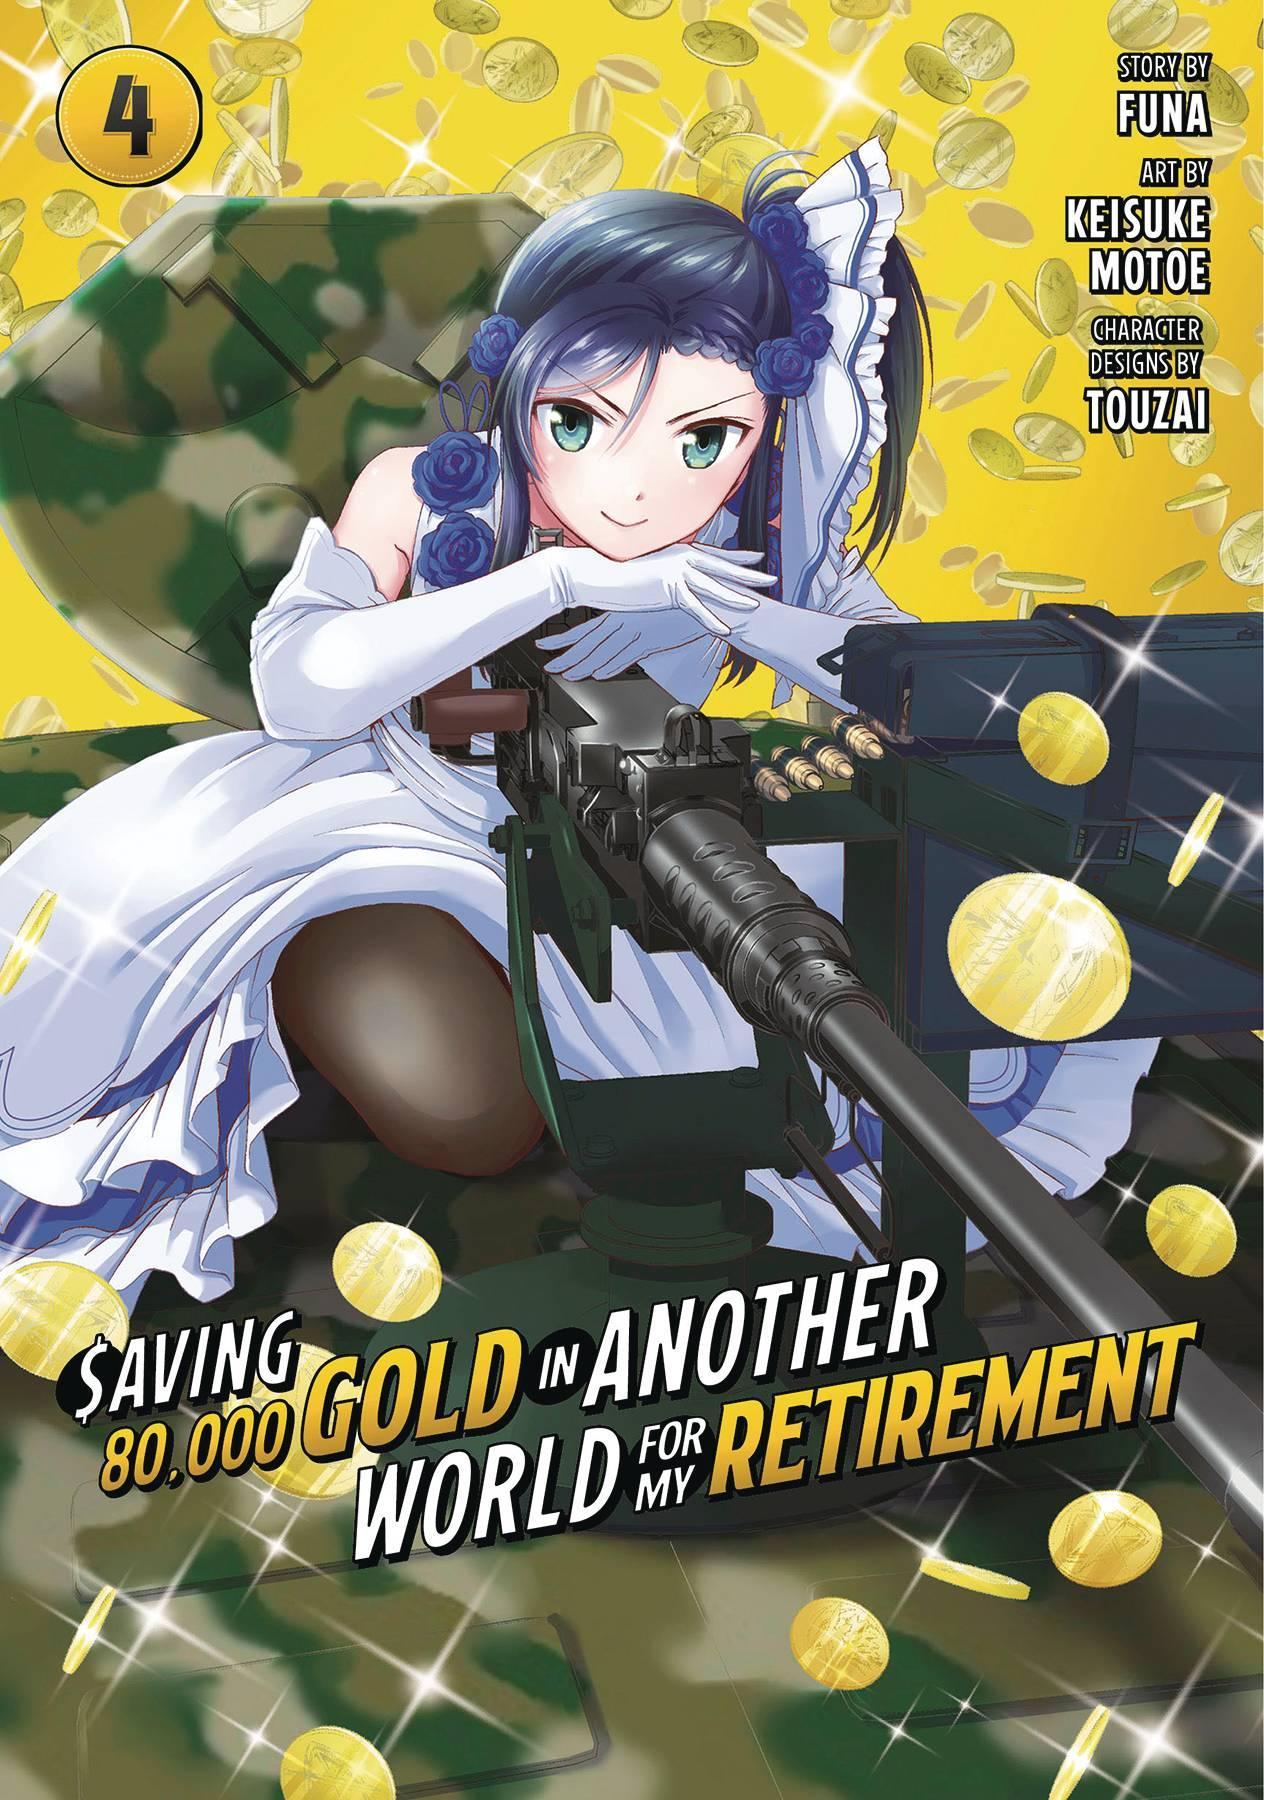 SAVING 80K GOLD IN ANOTHER WORLD GN VOL 04 - Kings Comics